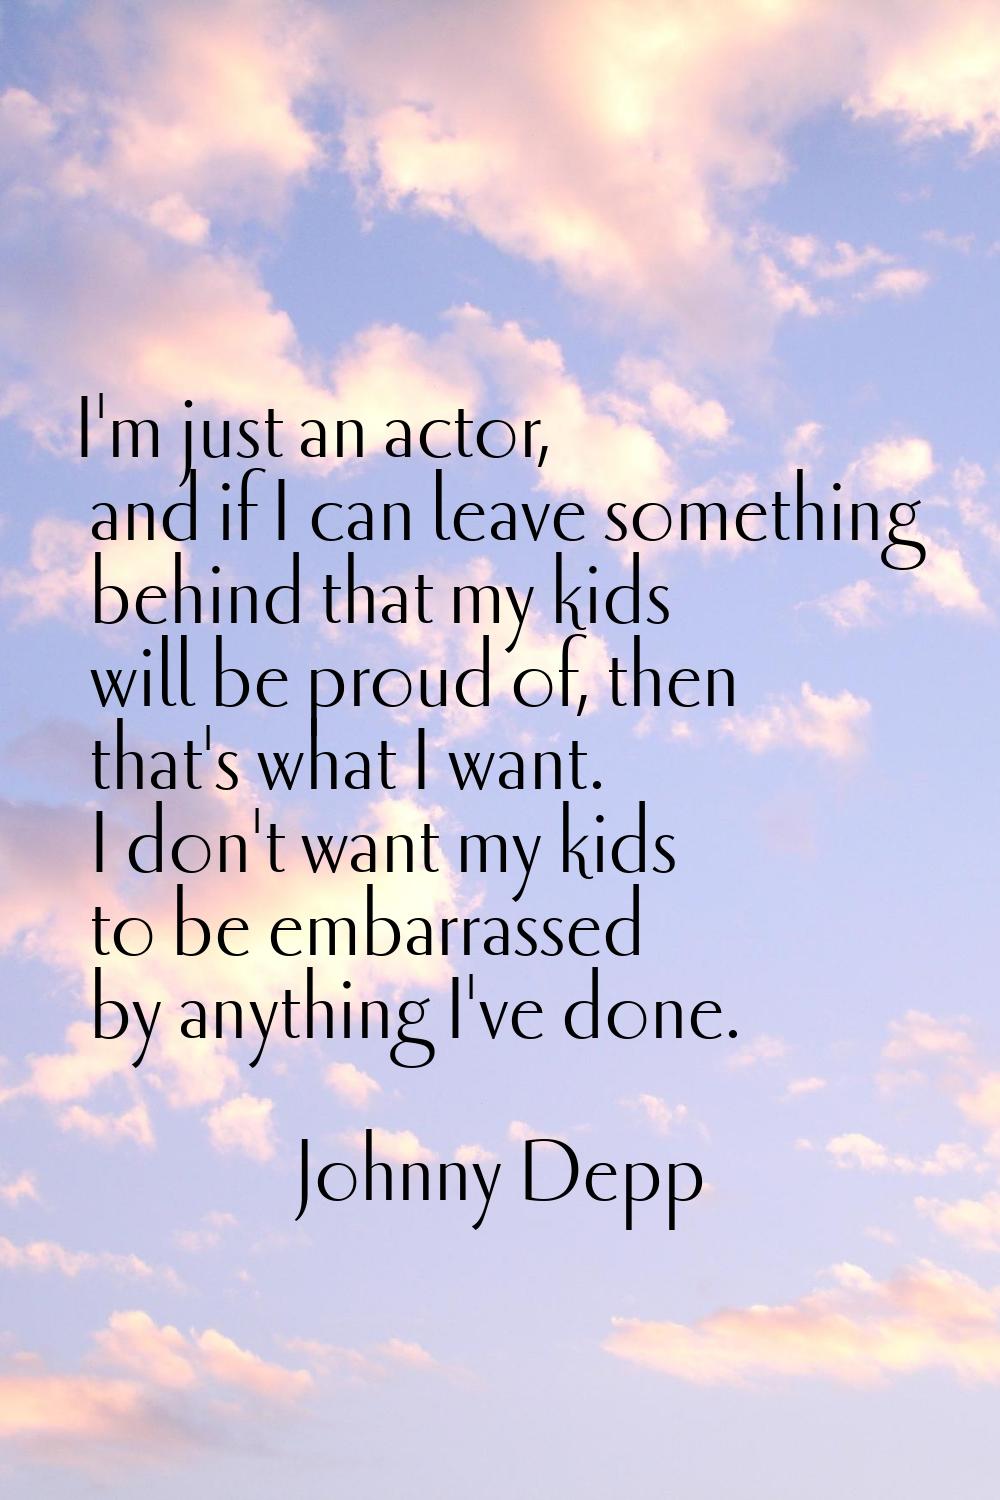 I'm just an actor, and if I can leave something behind that my kids will be proud of, then that's w